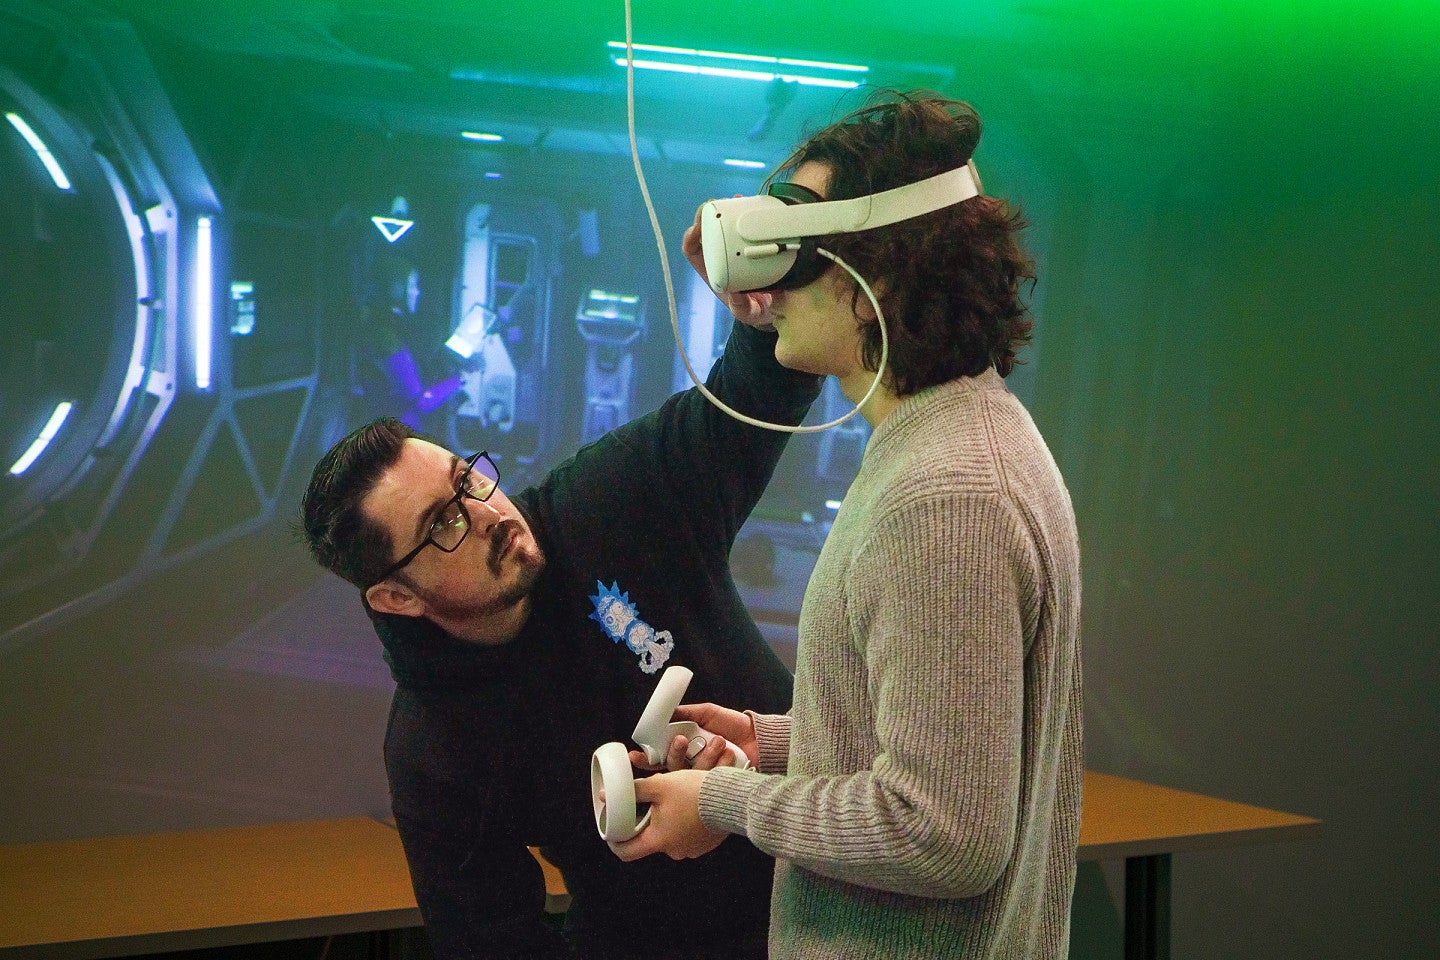 two people work with VR equipment in front of a screen displaying the VR content